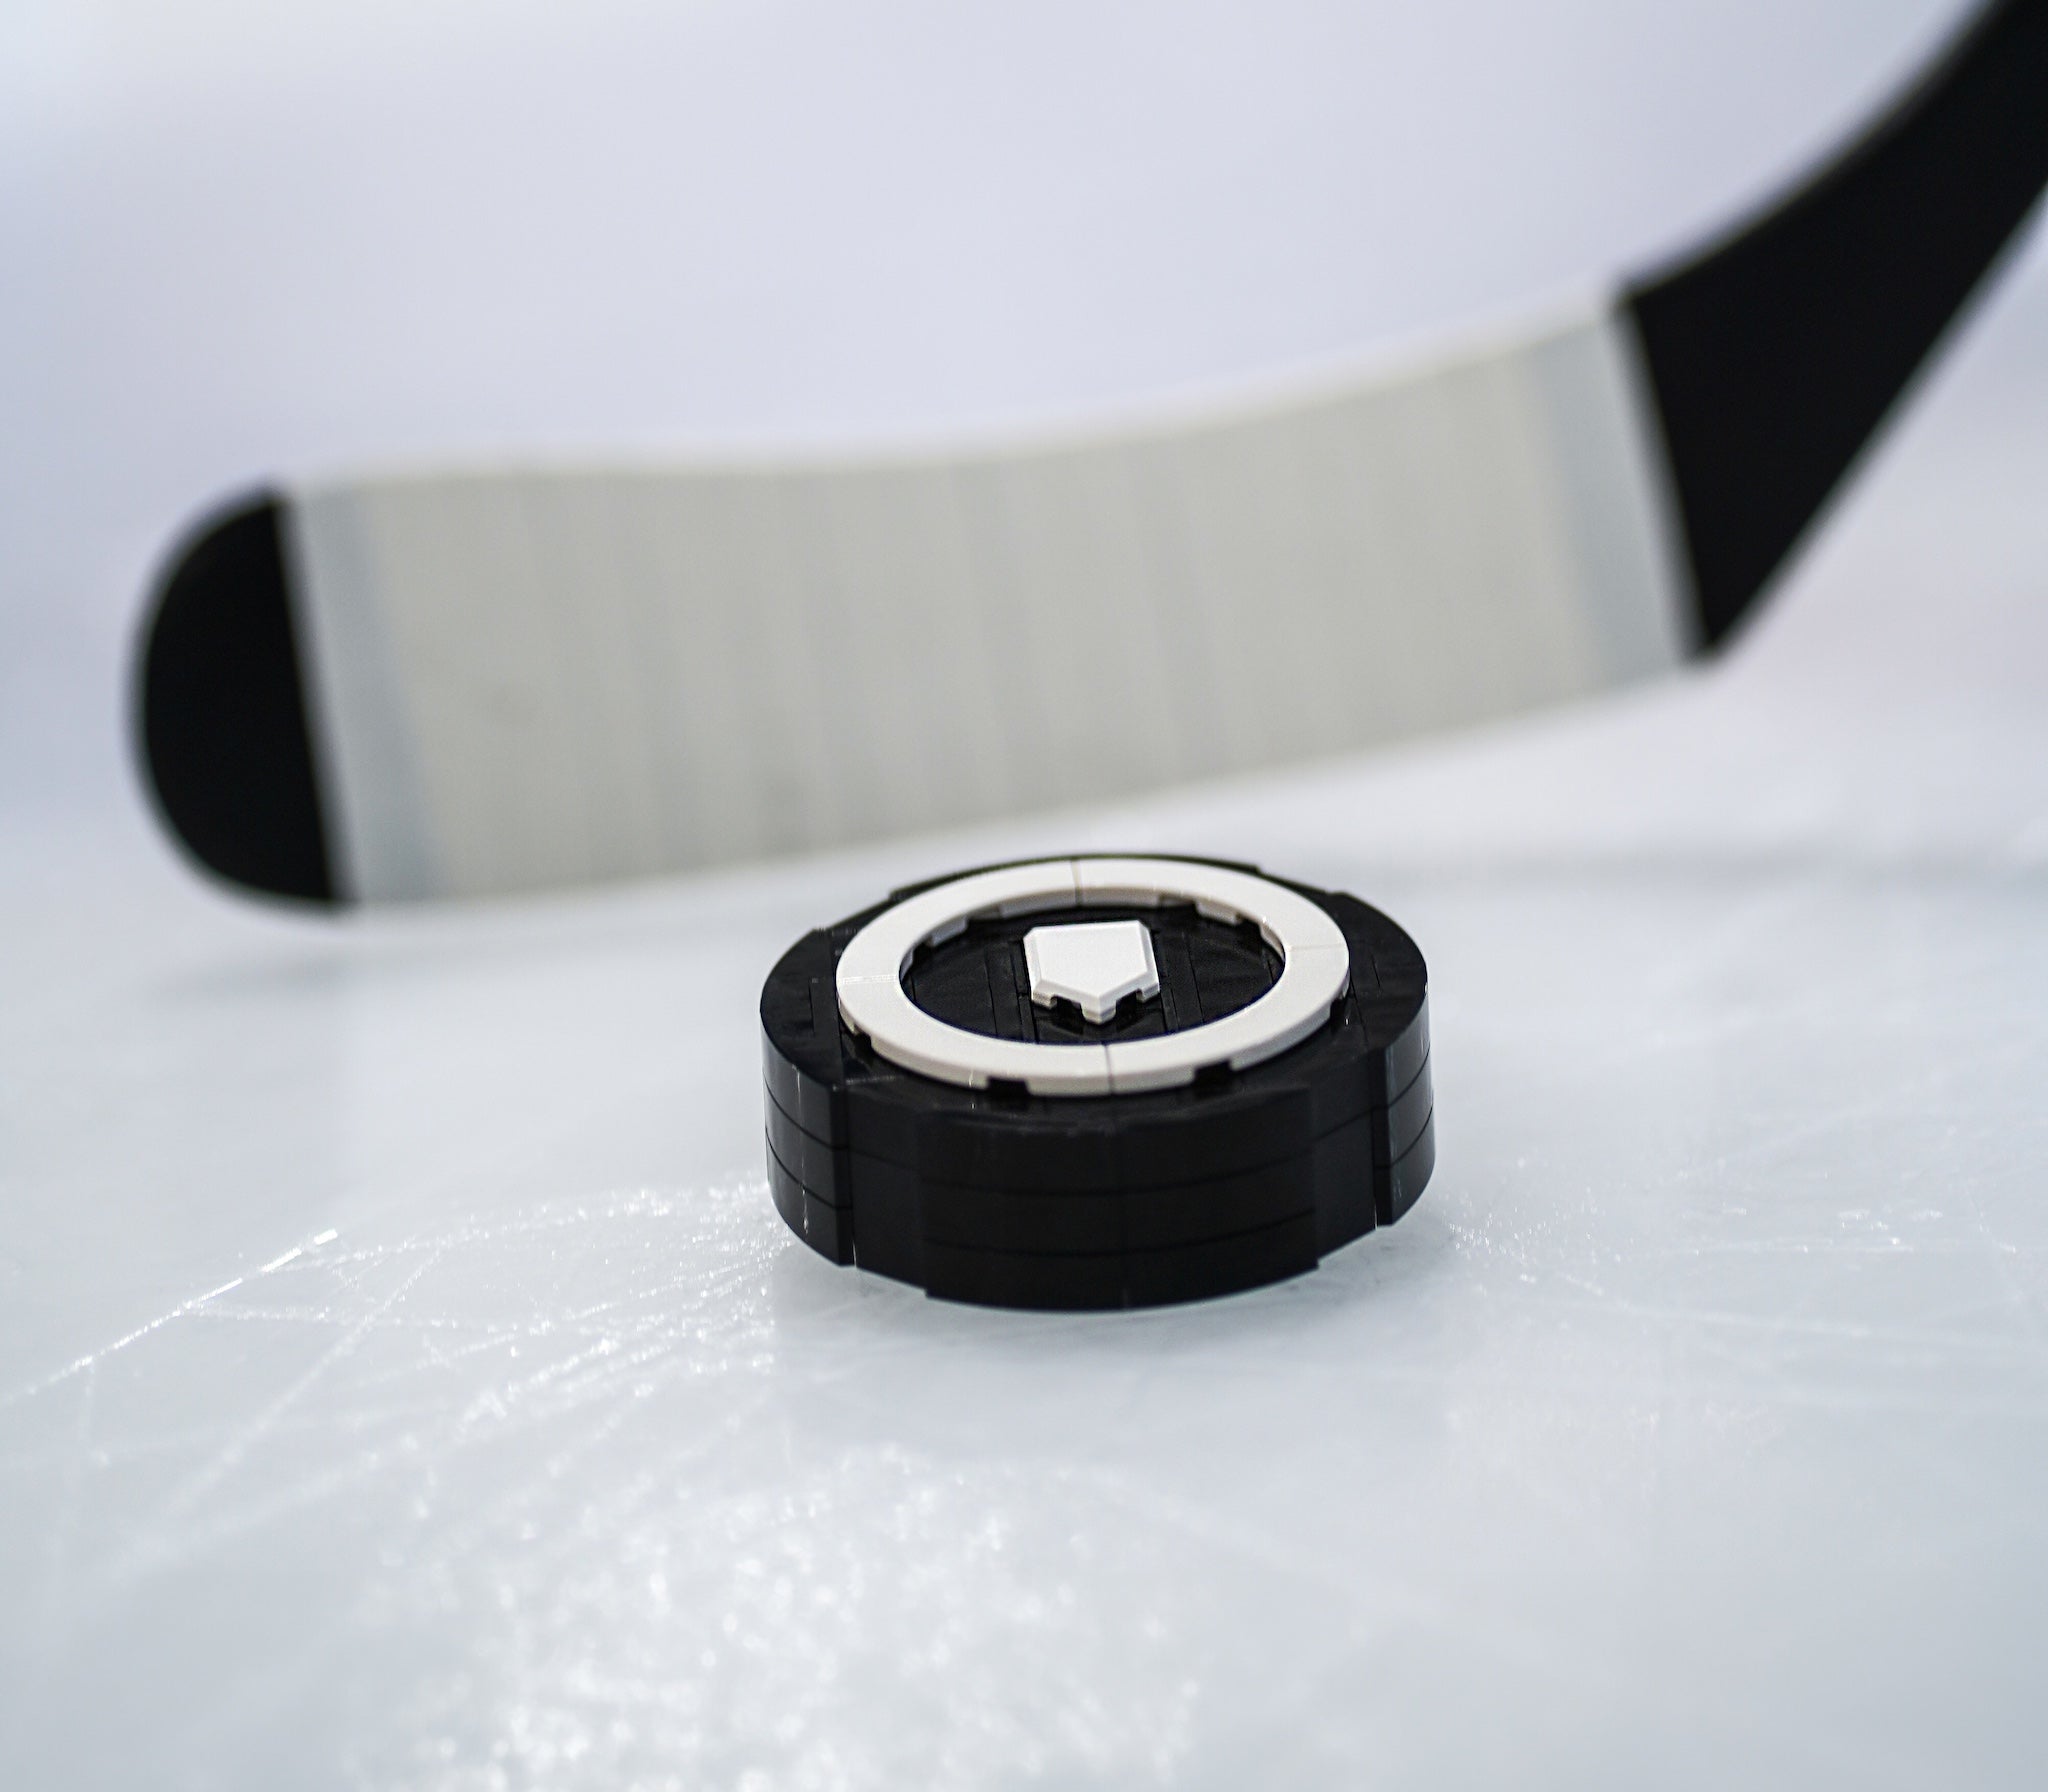 Hockey Puck on Ice Lice Sized Replica in LEGO Bricks by Bricker Builds